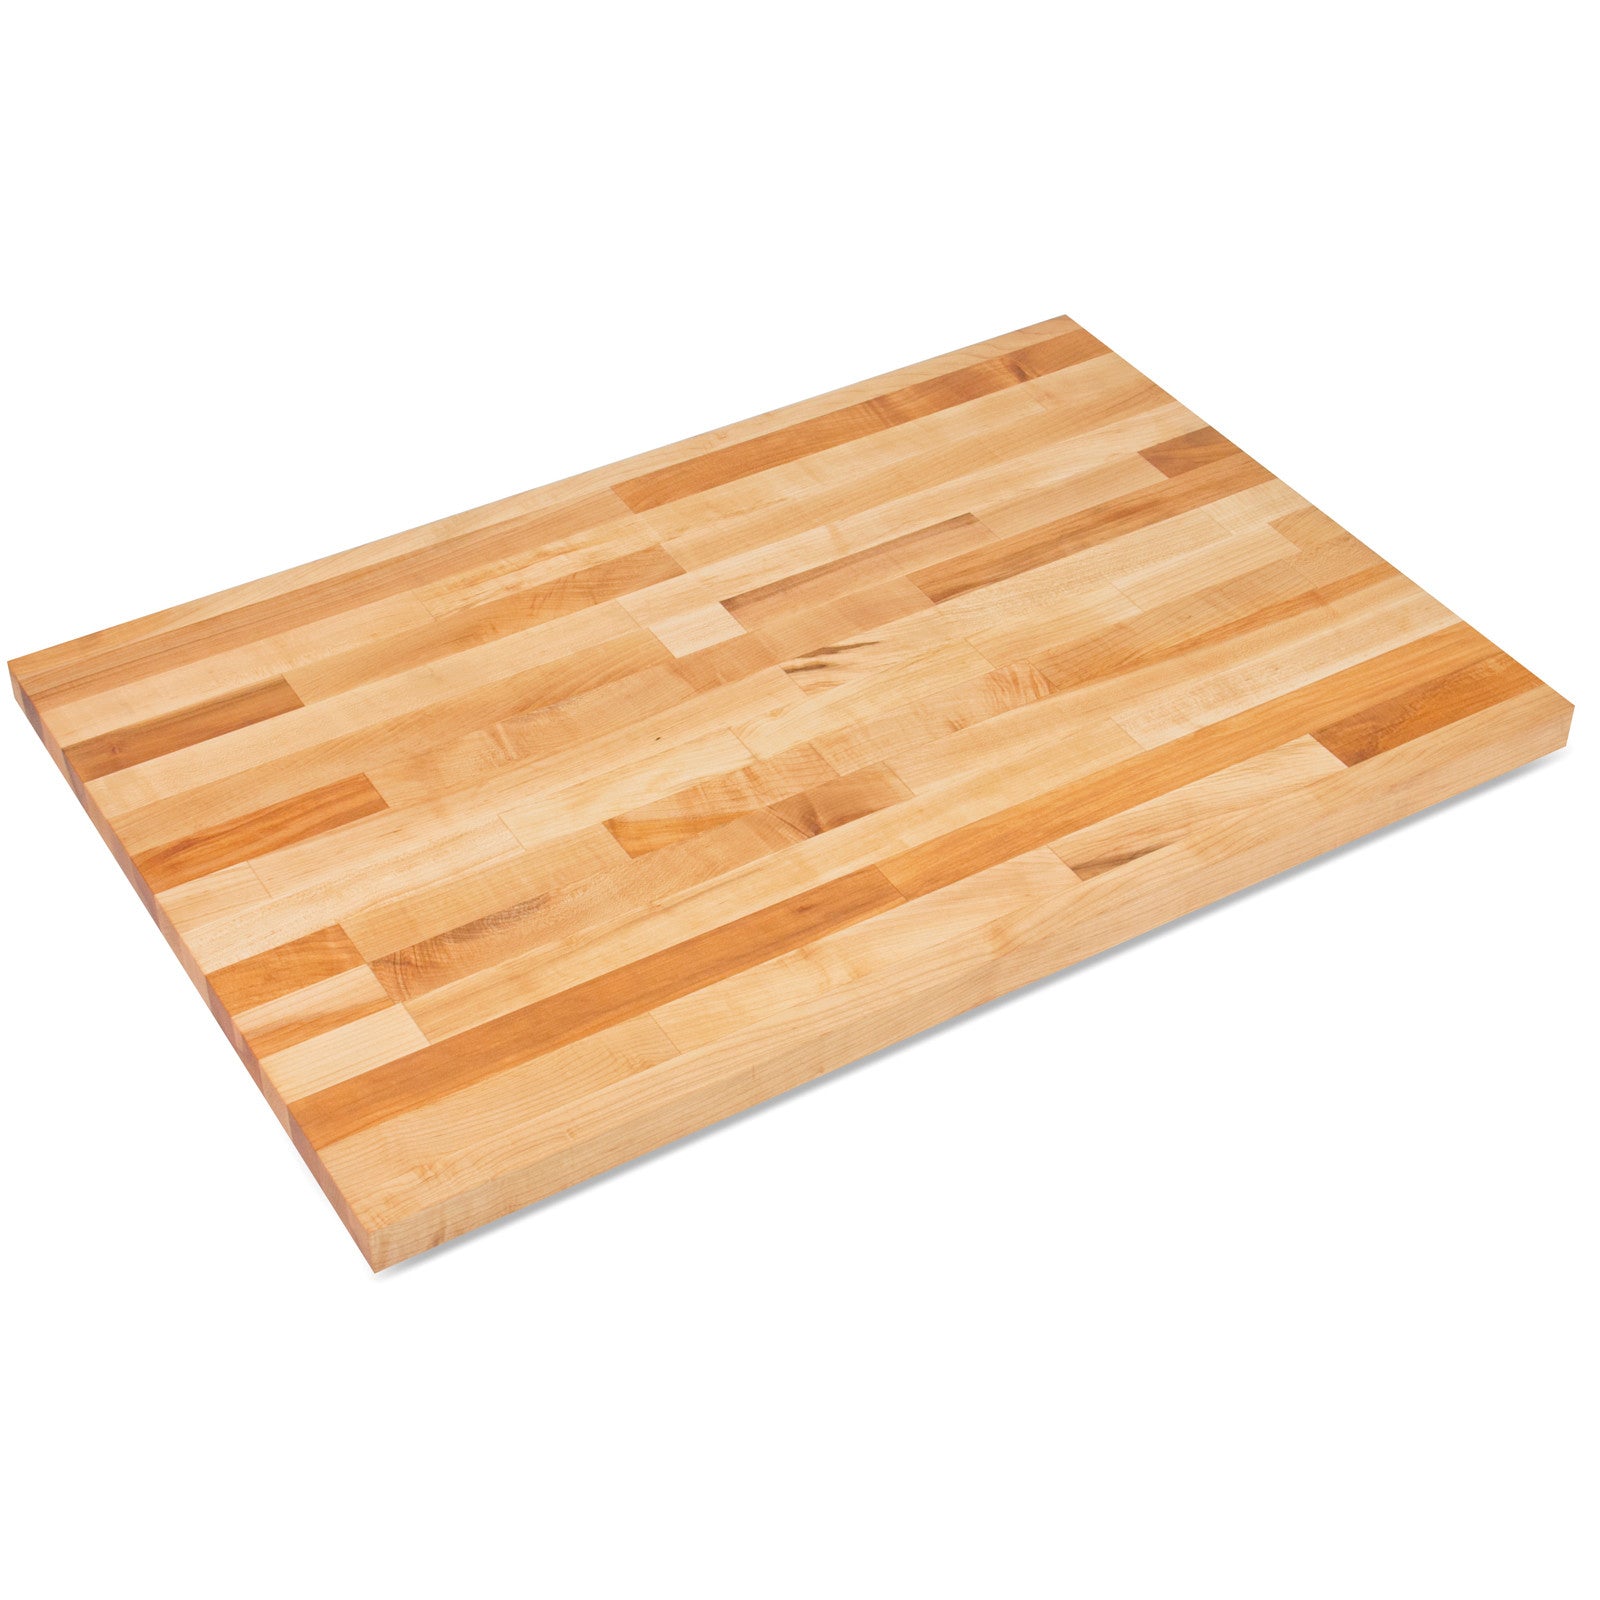 John Boos SC013-O Maple 1 3/4" Thick Replacement Top - 72 X 30 X 1.75